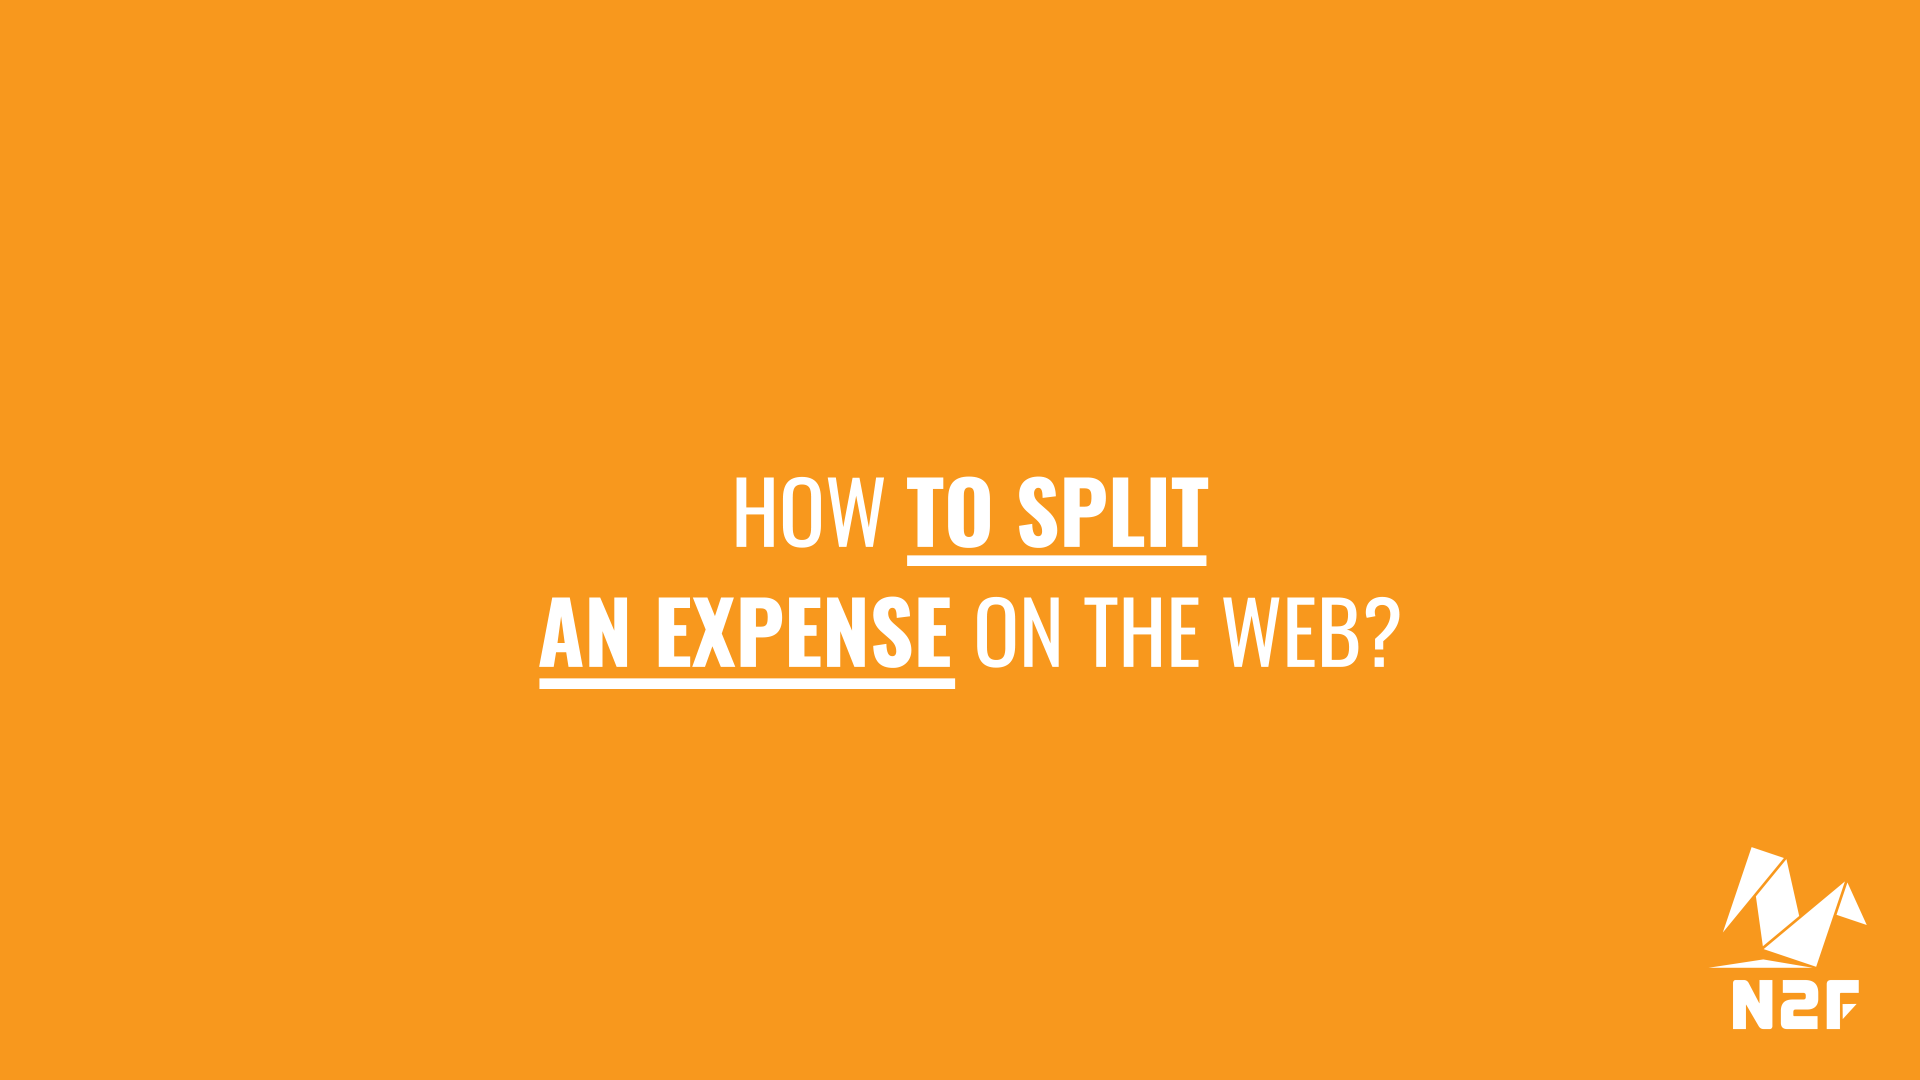 How to split an expense on the web?